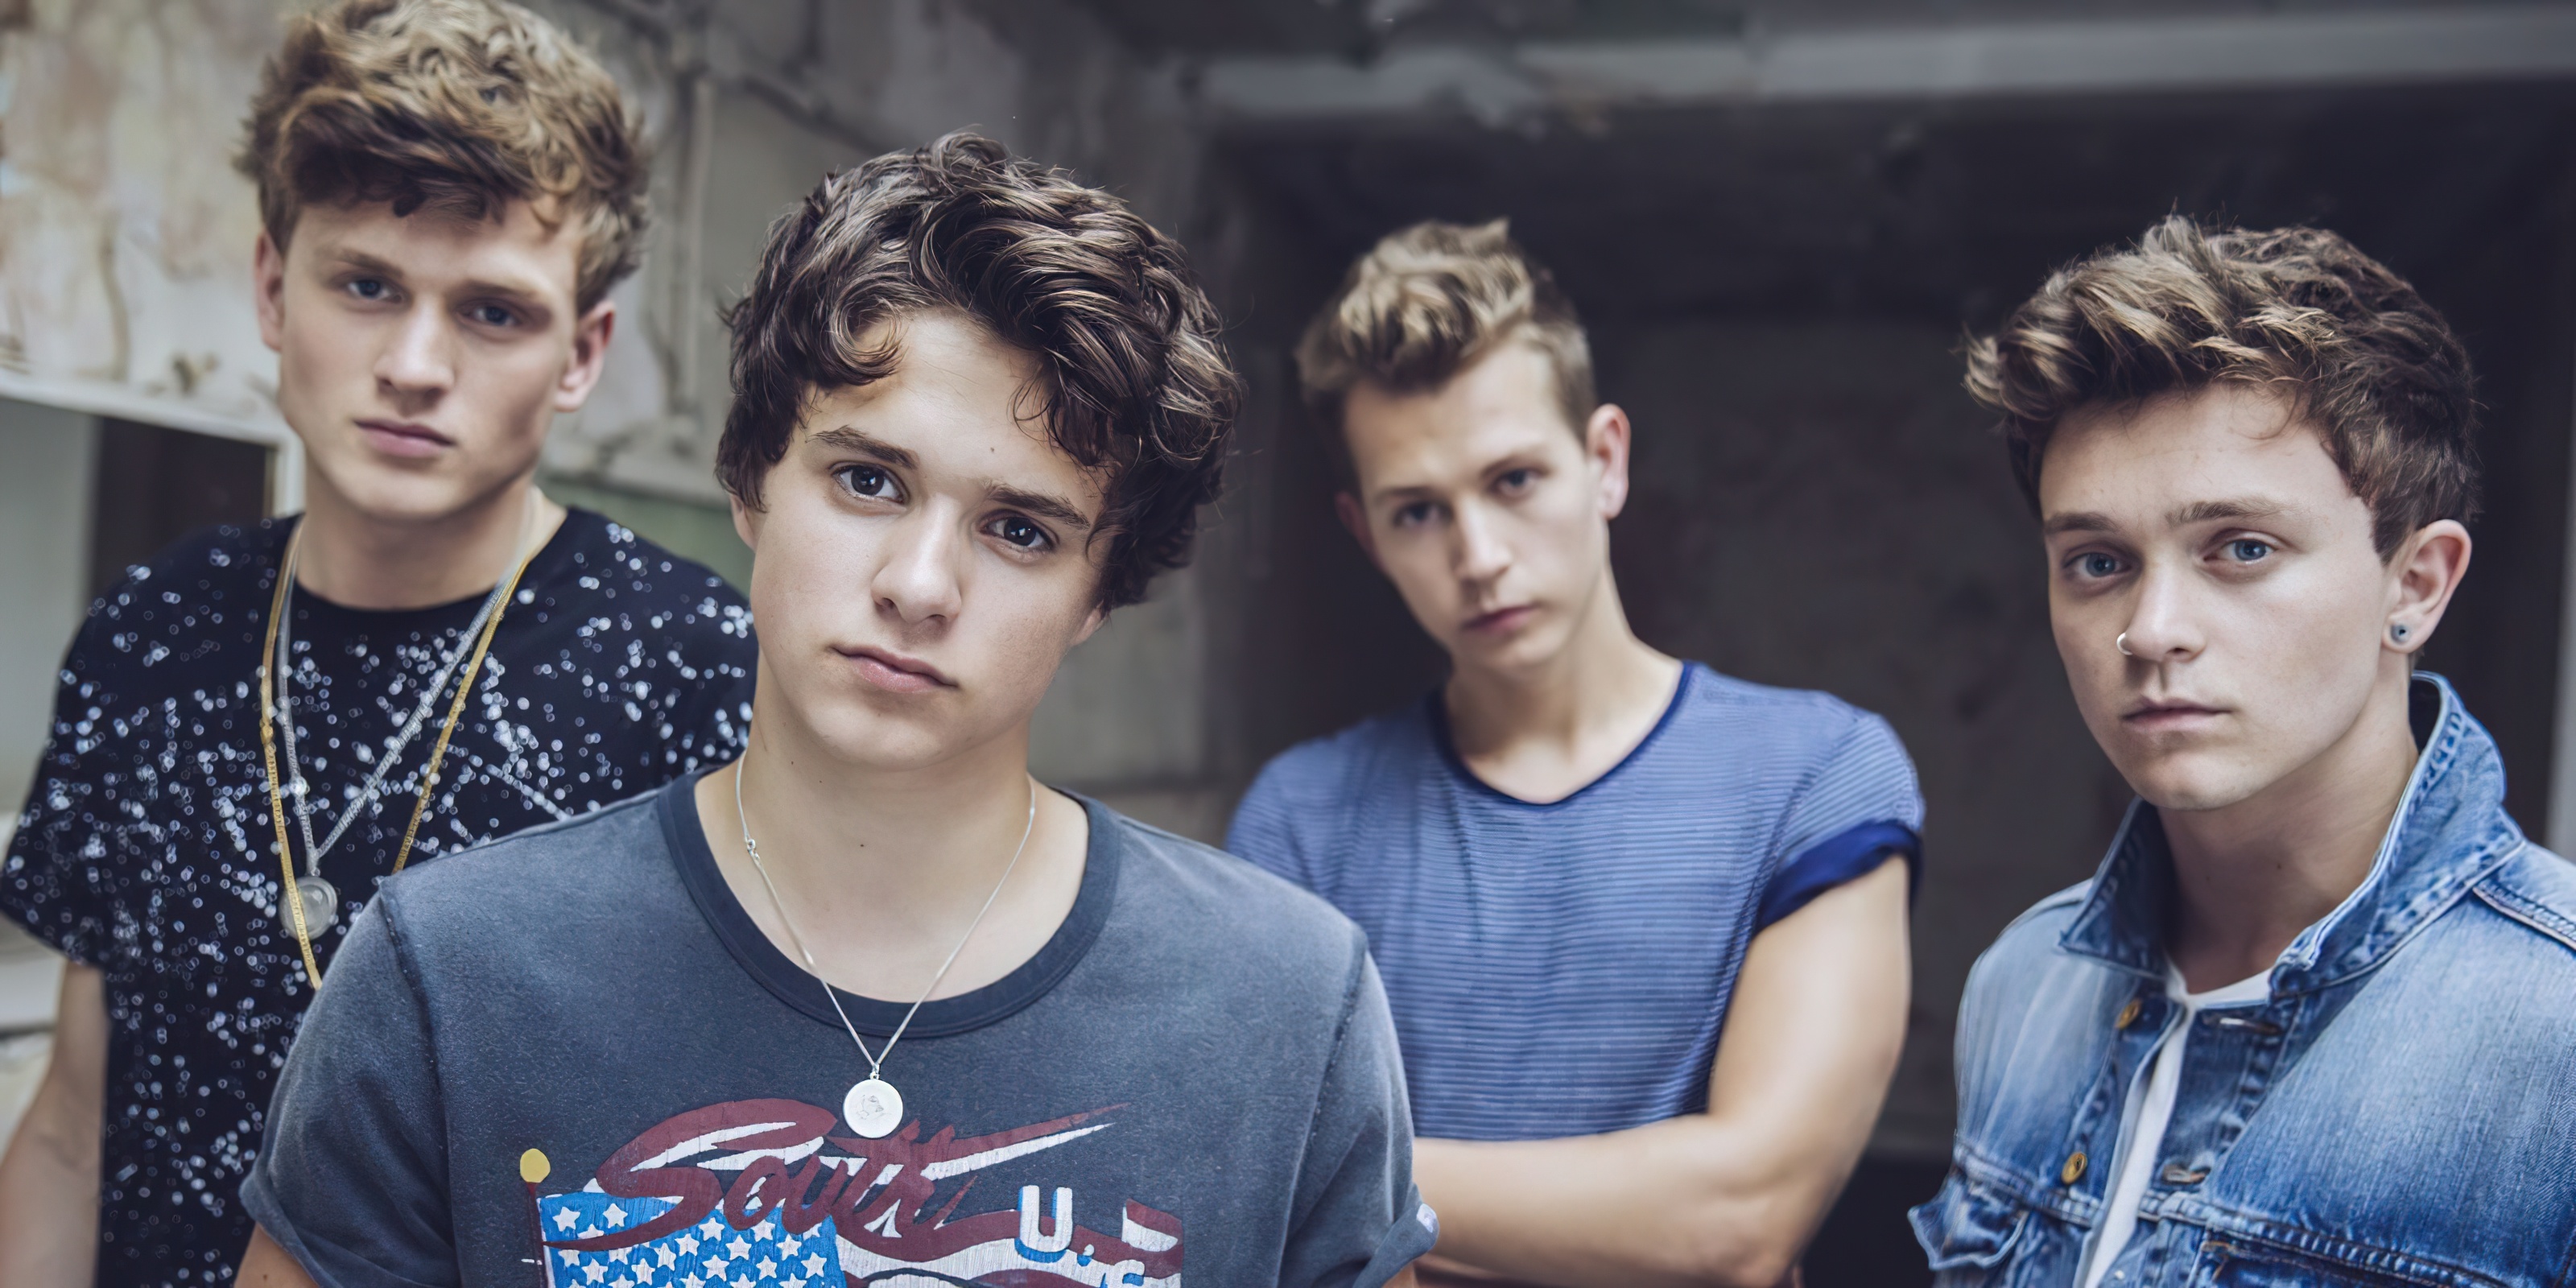 The Vamps, Music band, HD wallpapers and backgrounds, 3200x1600 Dual Screen Desktop